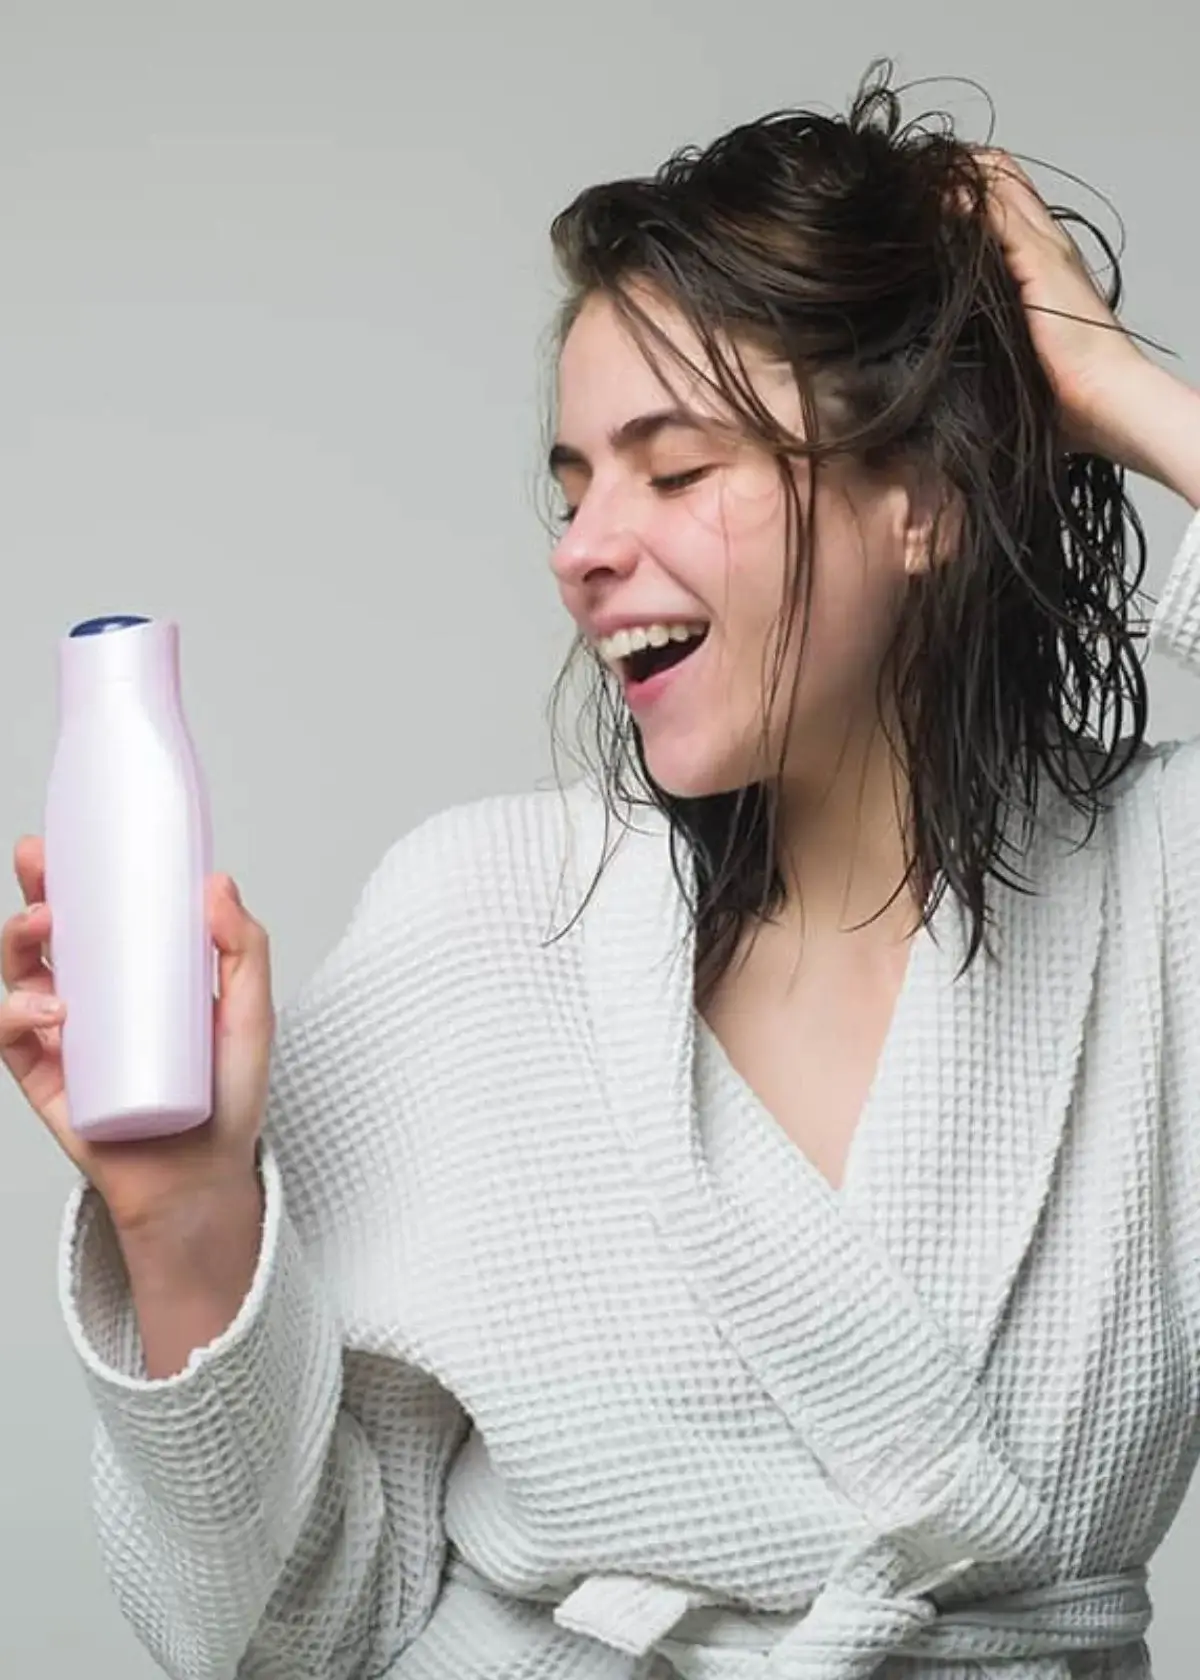 How to choose the right shampoo to make hair soft and silky?